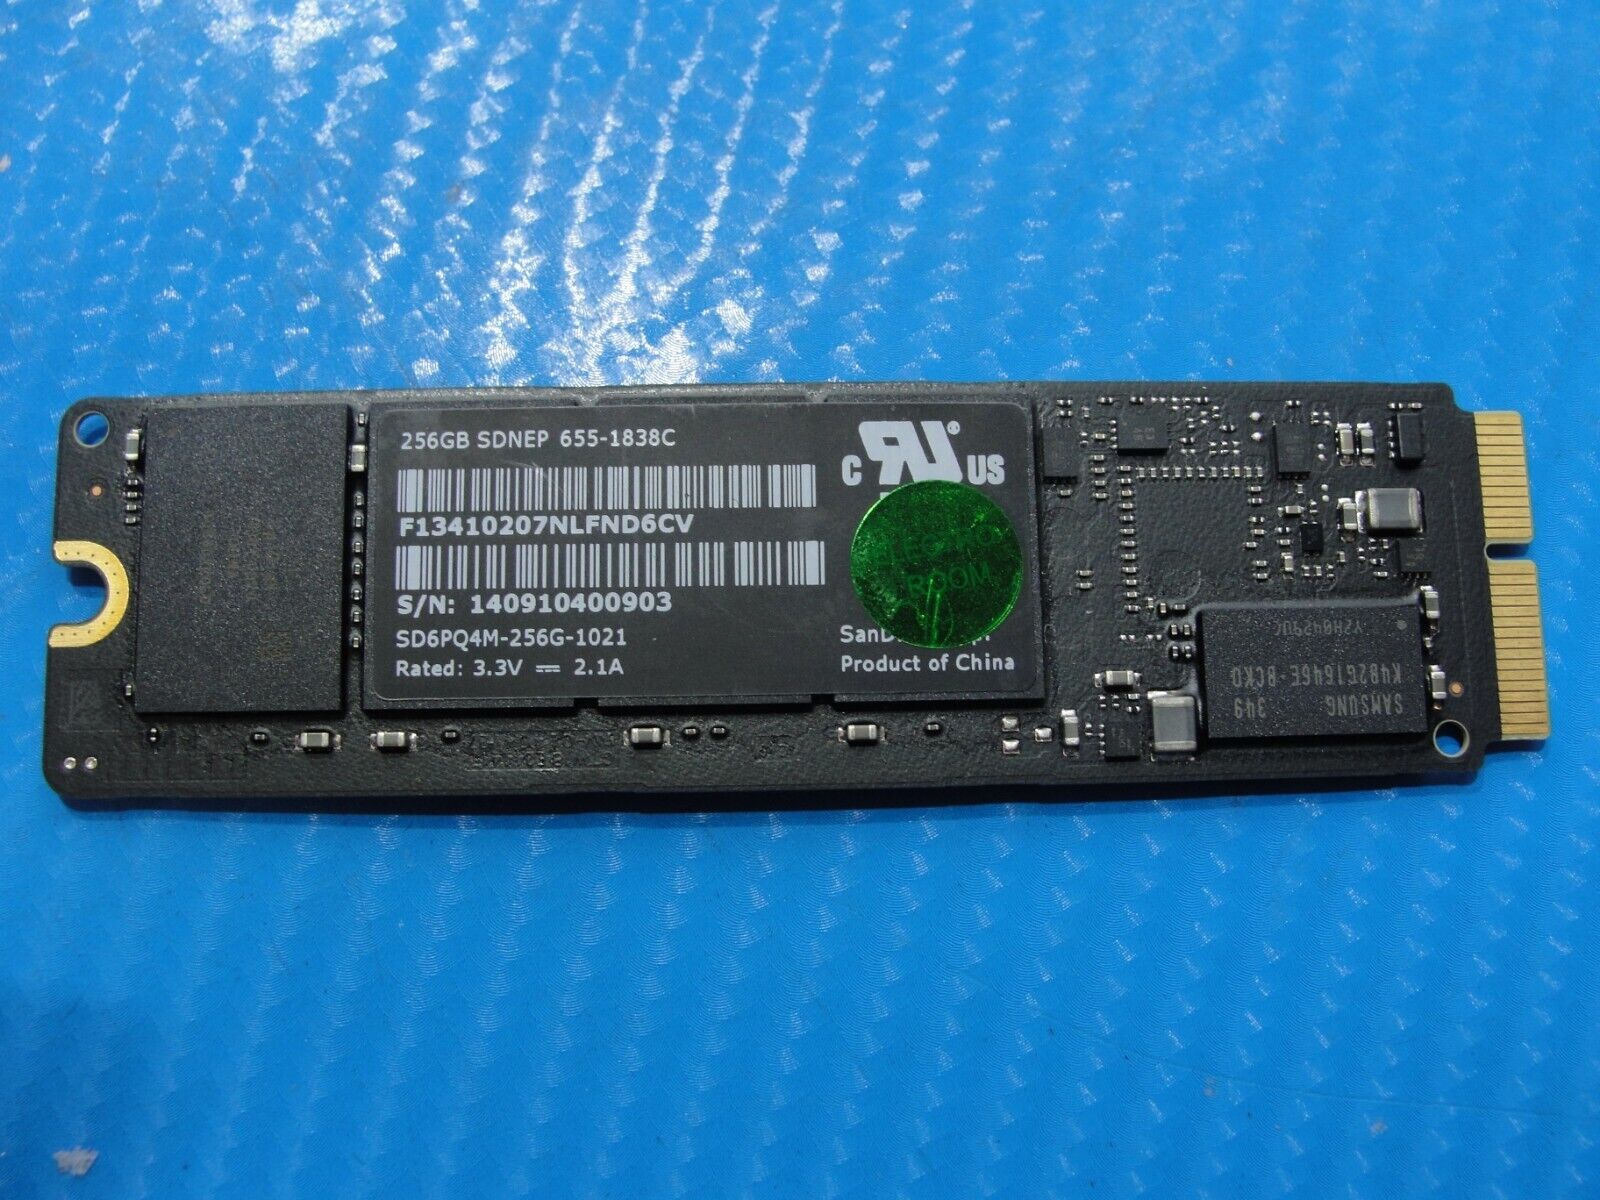 MacBook  A1446 SanDisk 256Gb Ssd Solid State Drive SD6PQ4M-256G-1021H 655-1838C